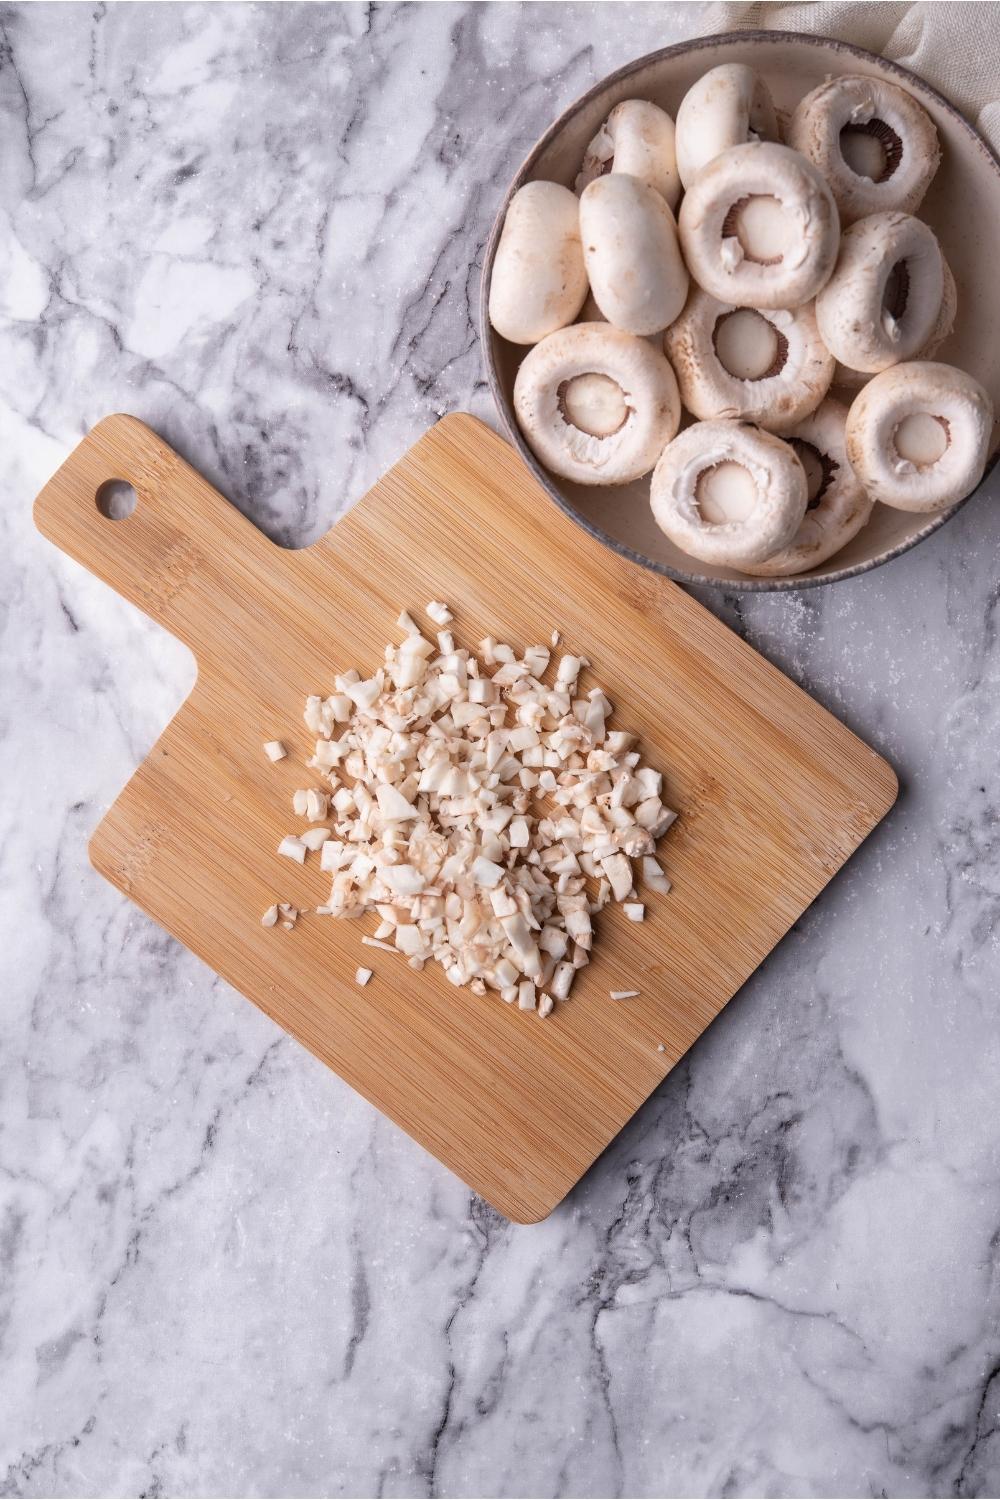 Chopped mushroom stems on a wood cutting board with a bowl of stemless mushrooms next to the board.